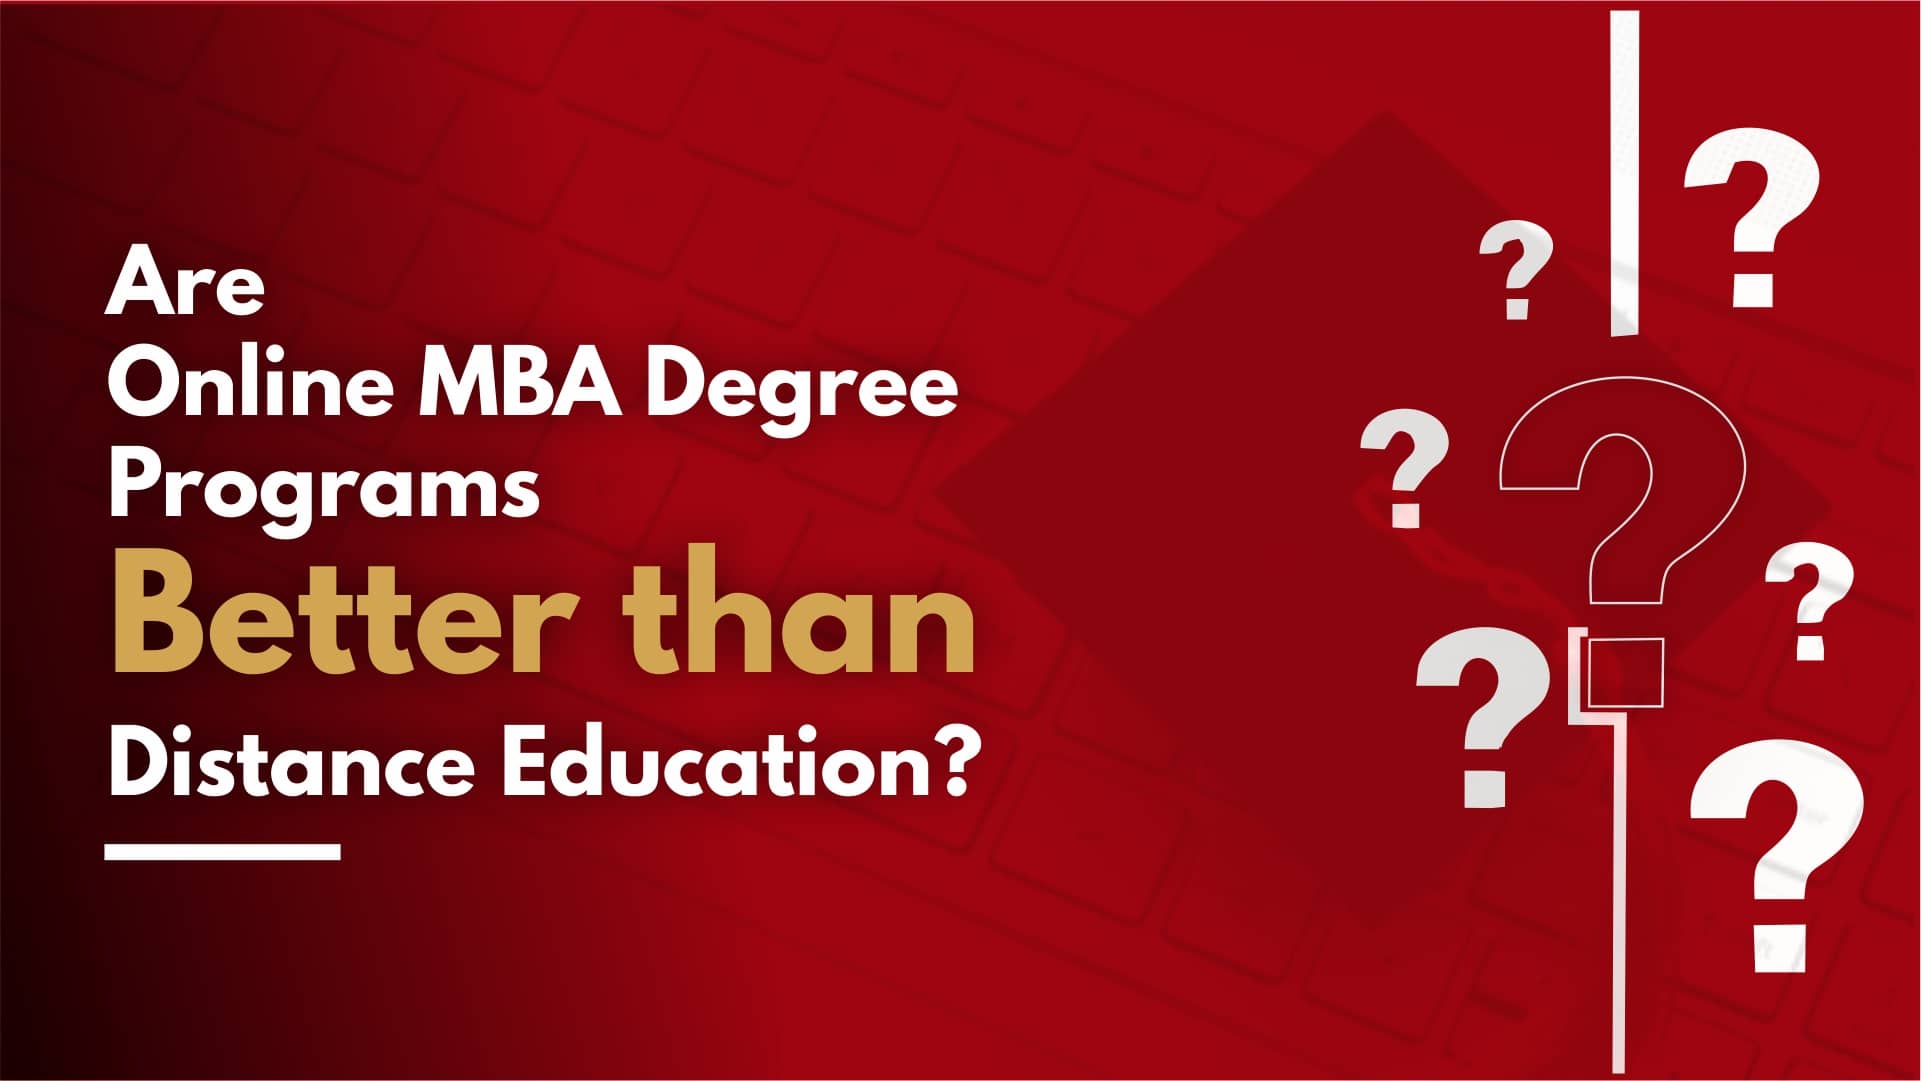 Are Online MBA Degree Programs Better than Distance Education?